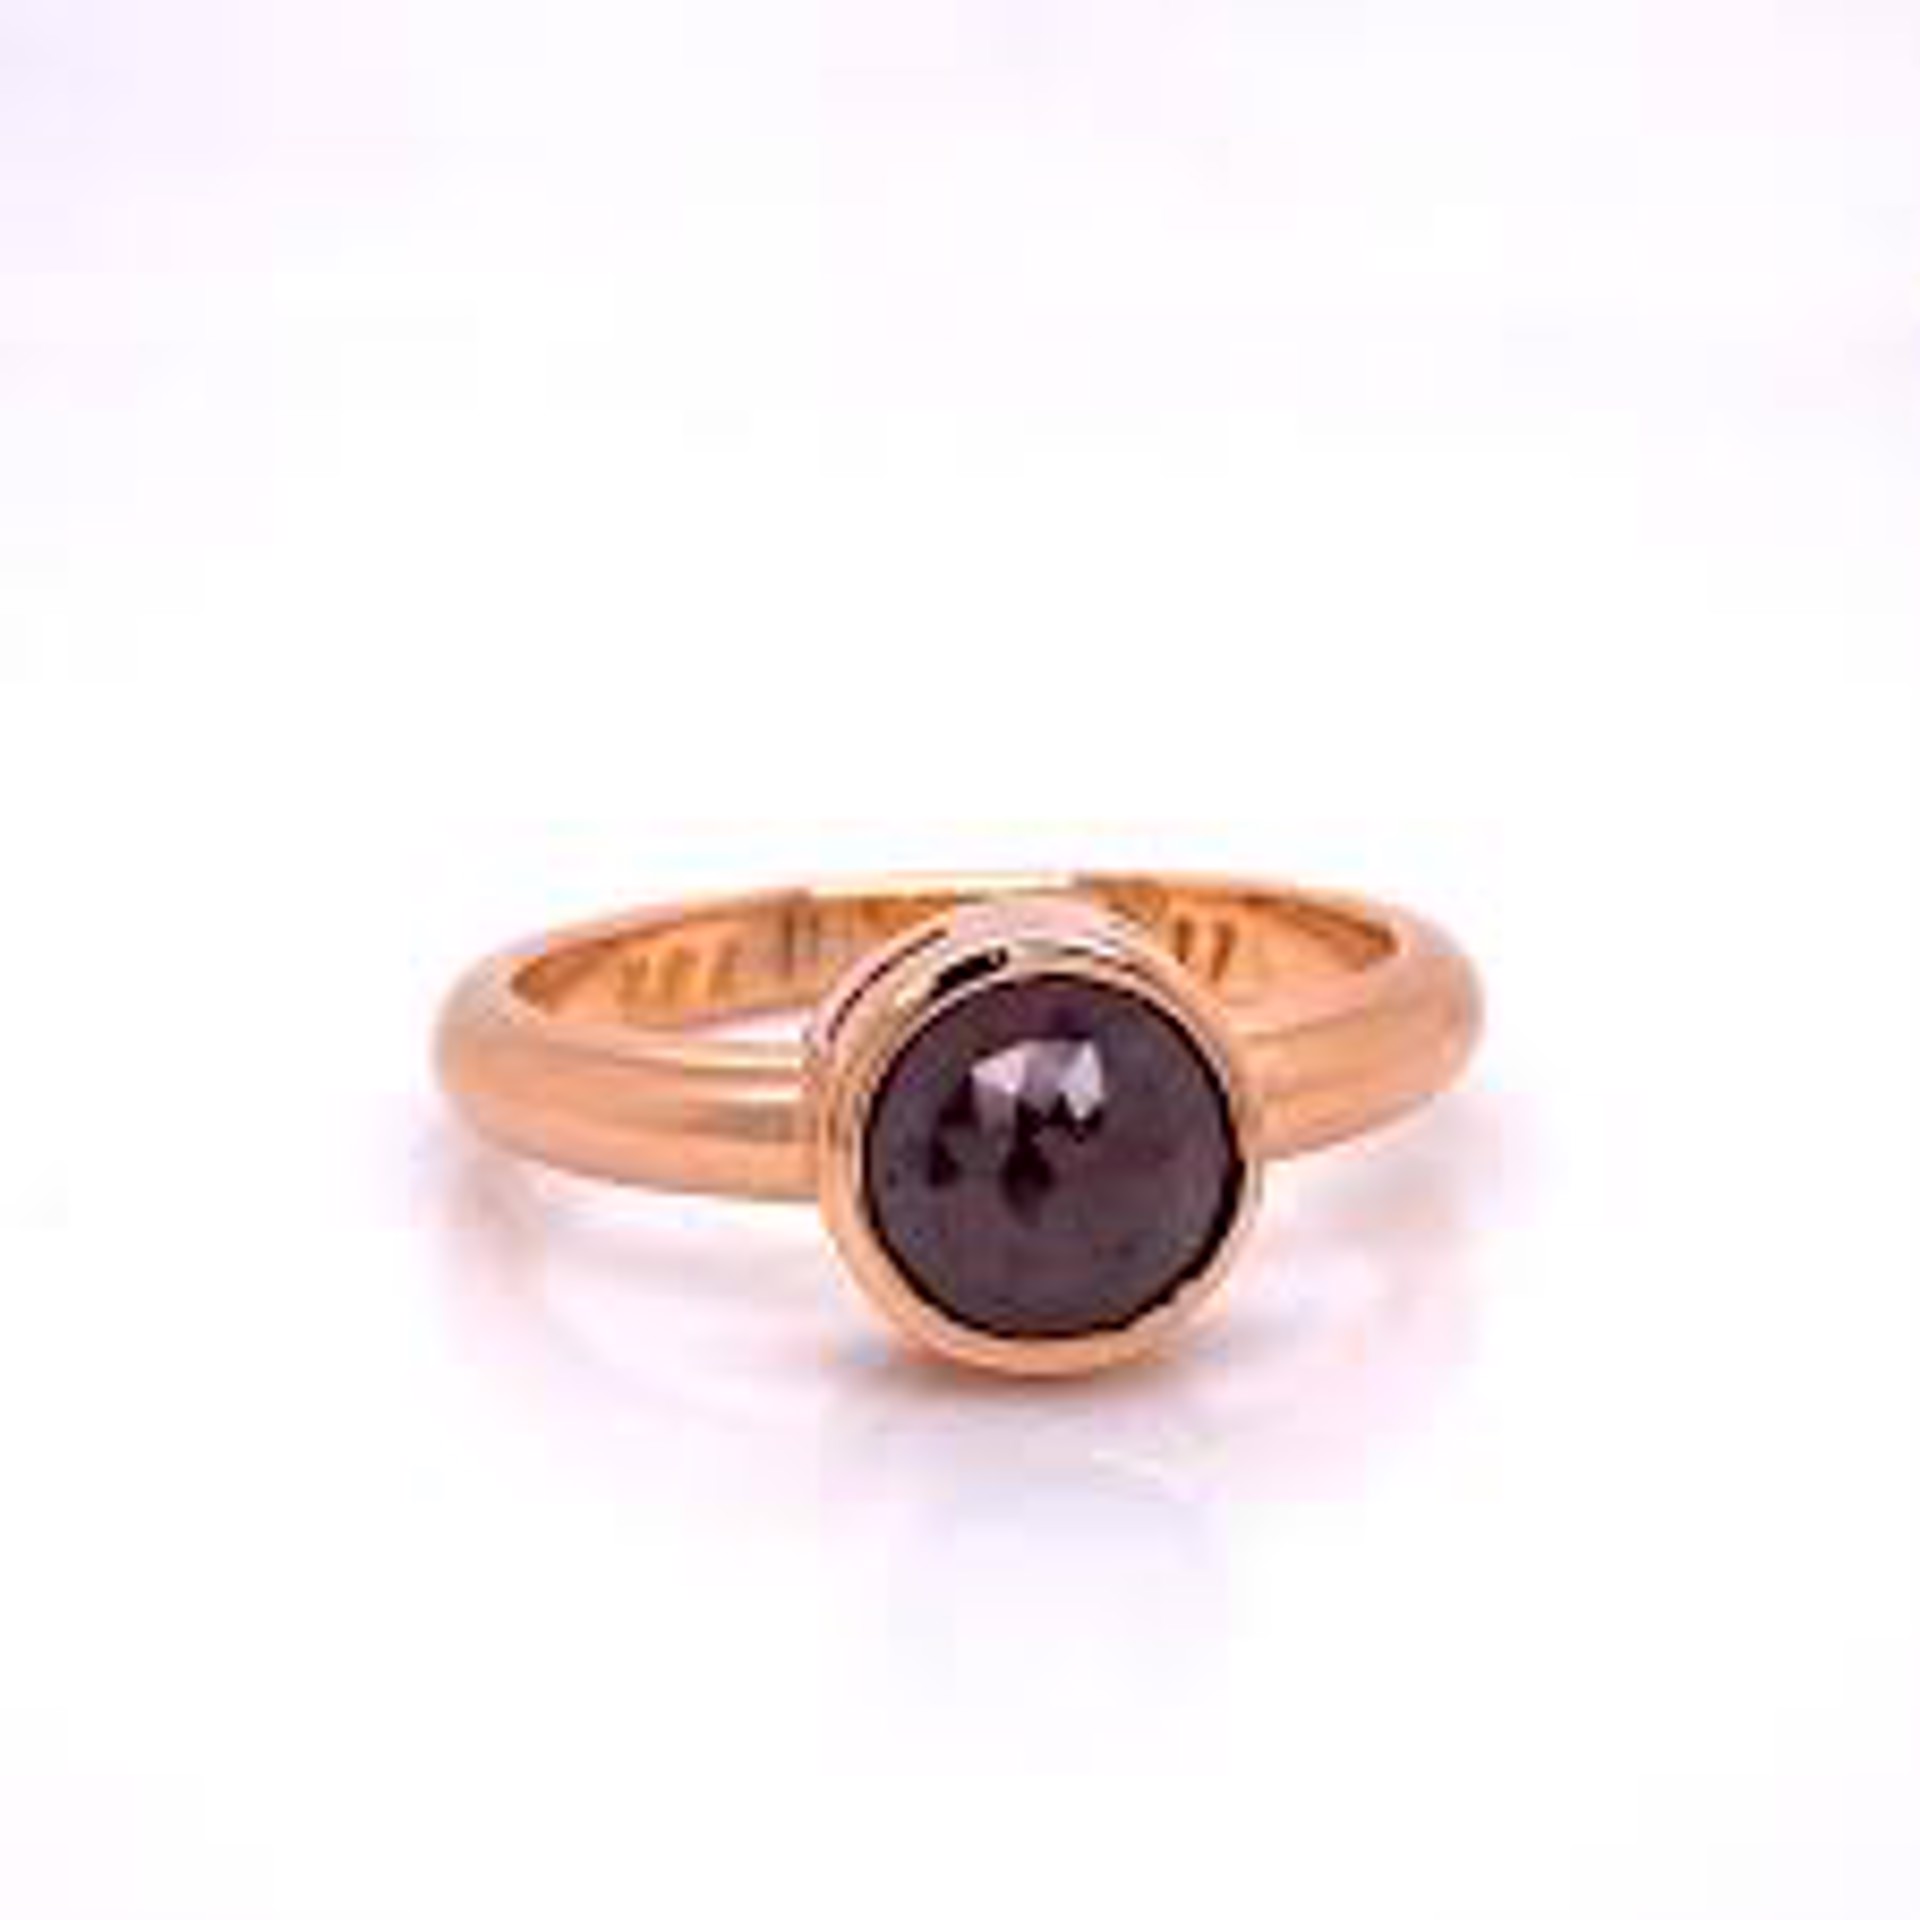 18k rose gold ring with bezel set red/brown rosecut diamond by Llyn Strong